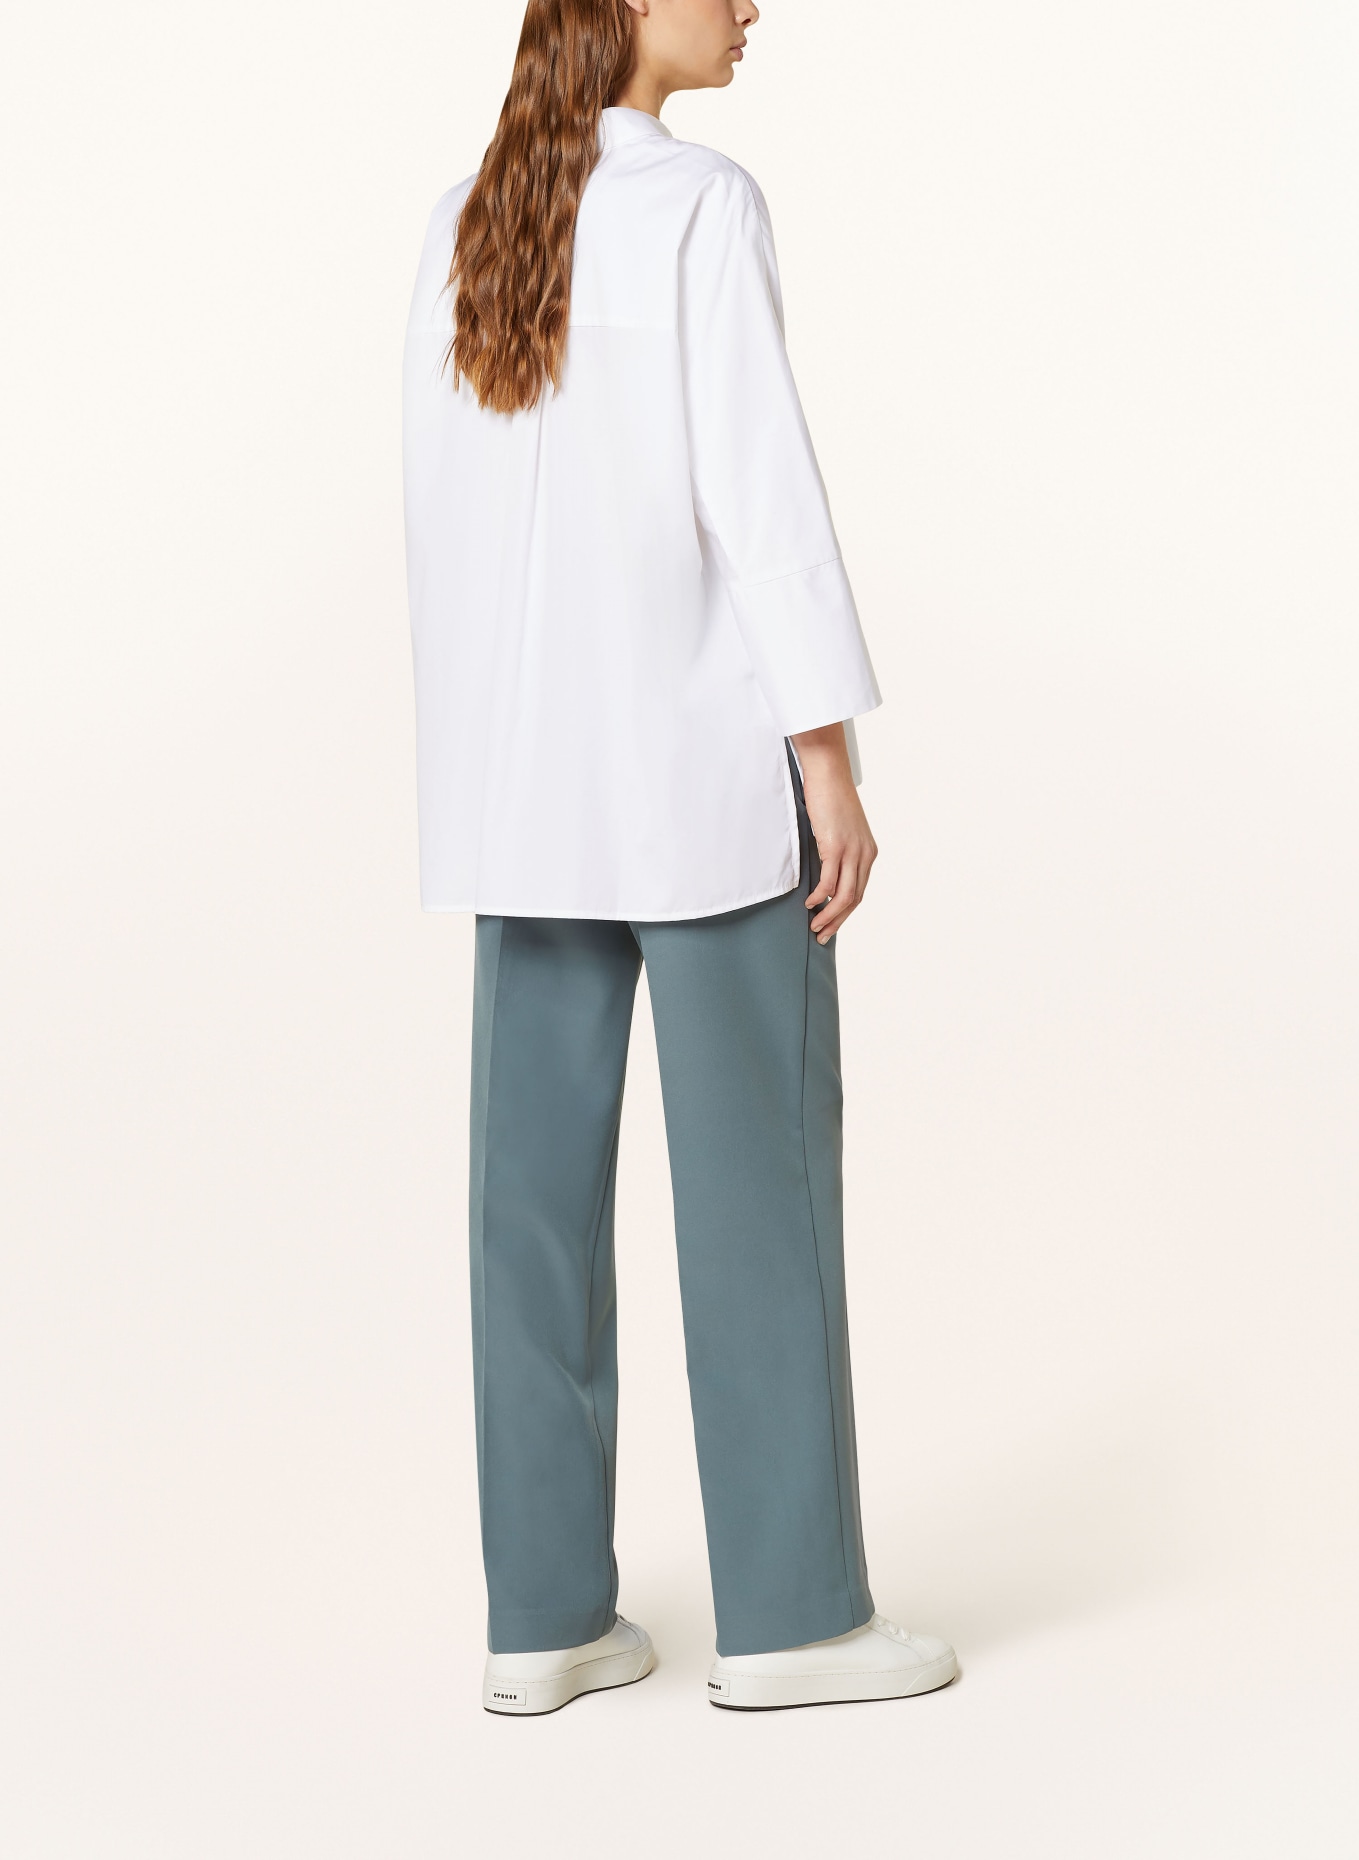 TONNO & PANNA Oversized shirt blouse with 3/4 sleeves, Color: WHITE (Image 3)